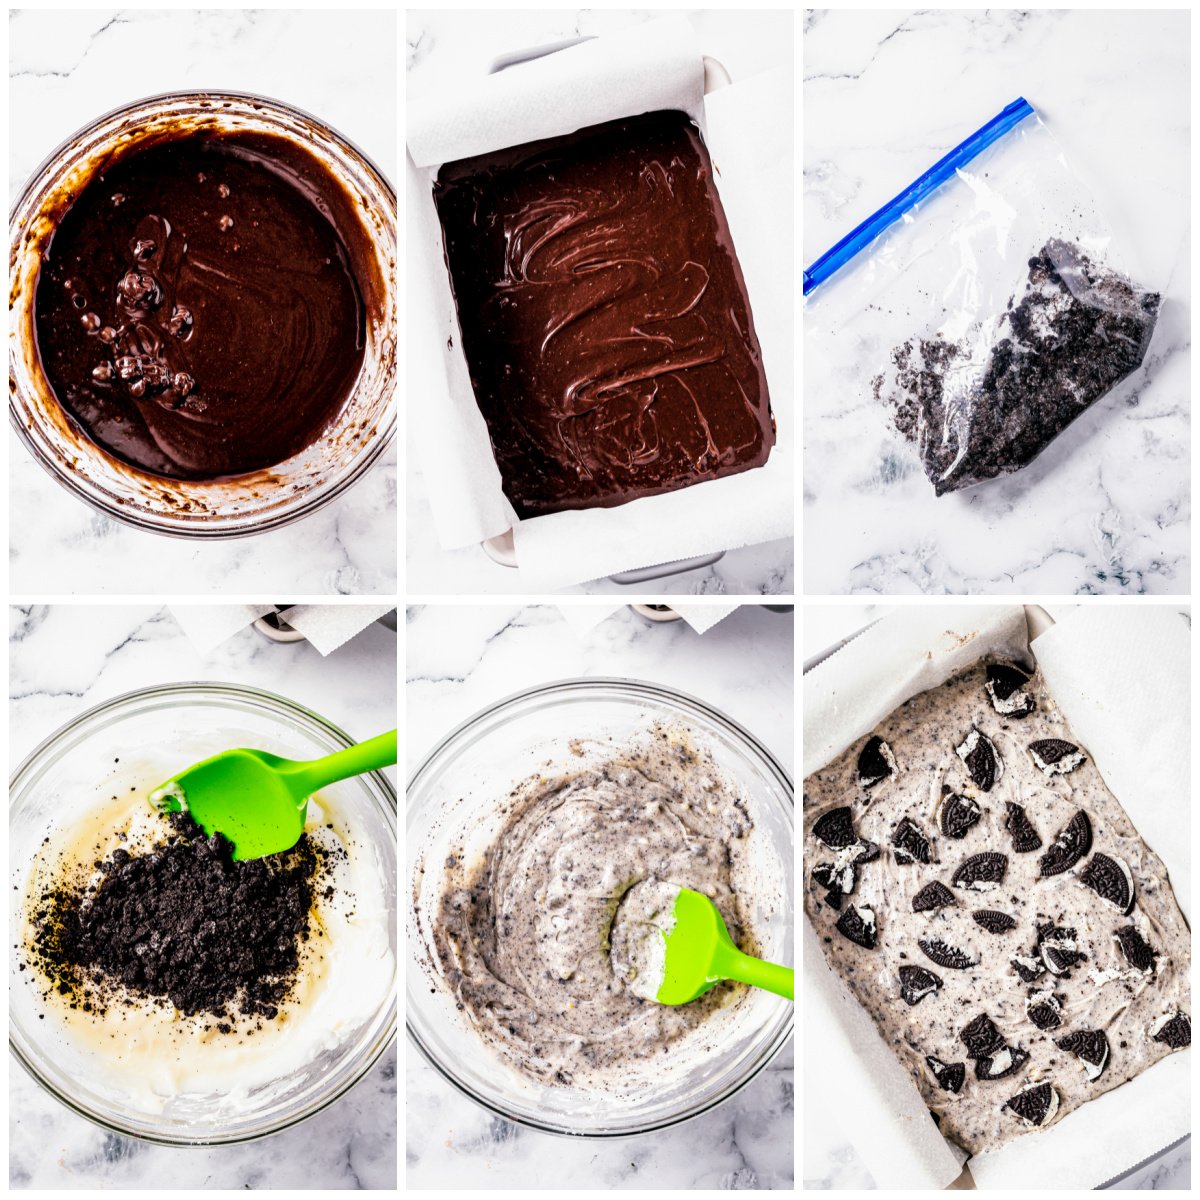 Step by step photos on how to make Oreo Fudge Brownies.